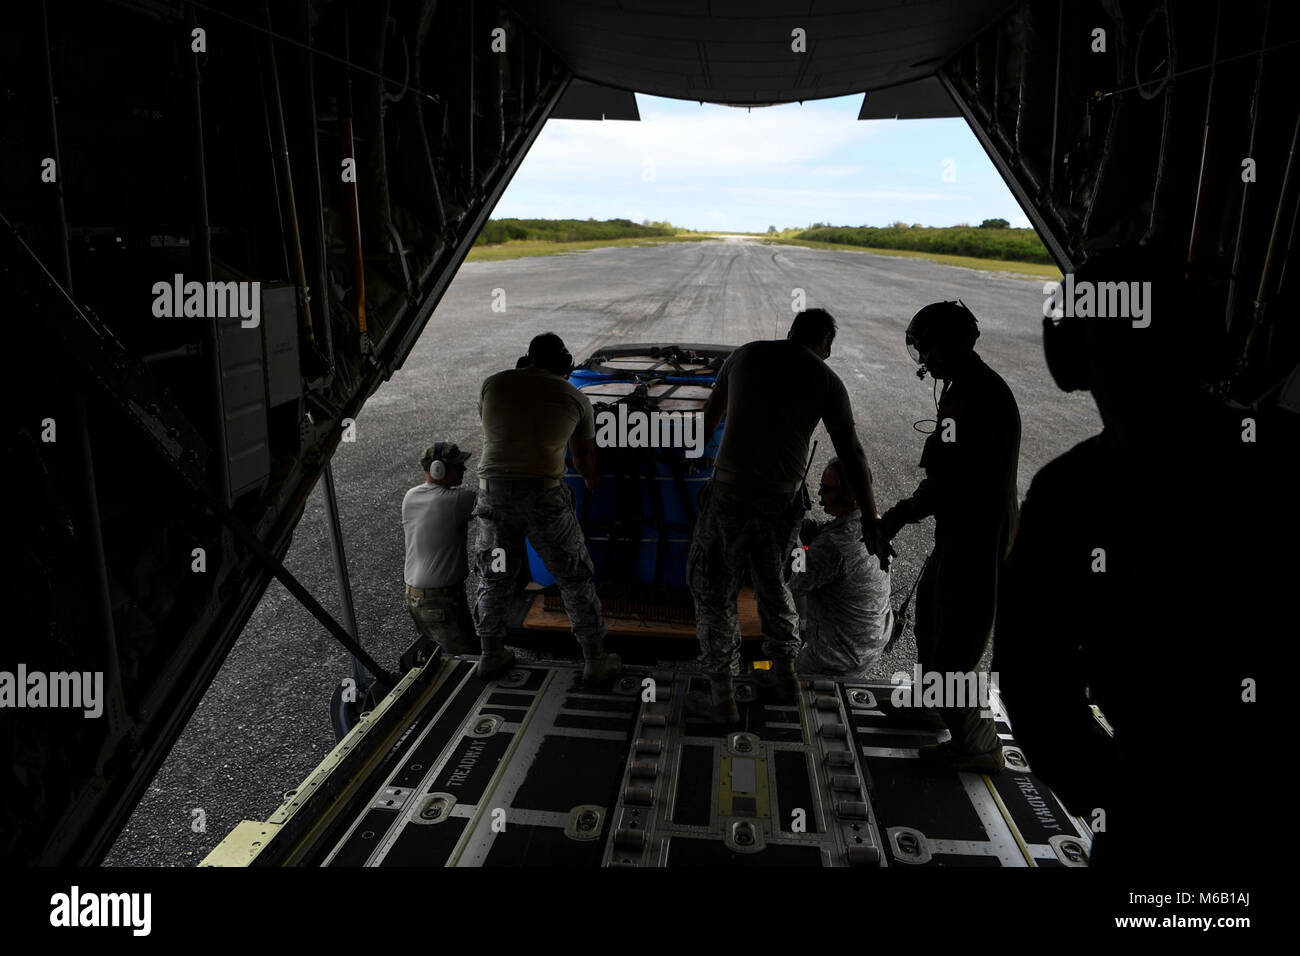 U.S. Air Force maintainers help 36th Airlift Squadron loadmasters recover a pallet back onto a C-130J Super Hercules after an airdrop mission during exercise COPE NORTH 18 at Tinian, U.S. Commonwealth of the Northern Mariana Islands, Feb. 27. CN18 is a Pacific Air Forces sponsored tri-lateral field training exercise (FTX) designed to develop synergistic and increase interoperability of U.S. Air Forces, Royal Australian Air Force (RAAF), and the Koku Jieitai (Japanese Air Self-Defense Force). (U.S. Air Force Stock Photo